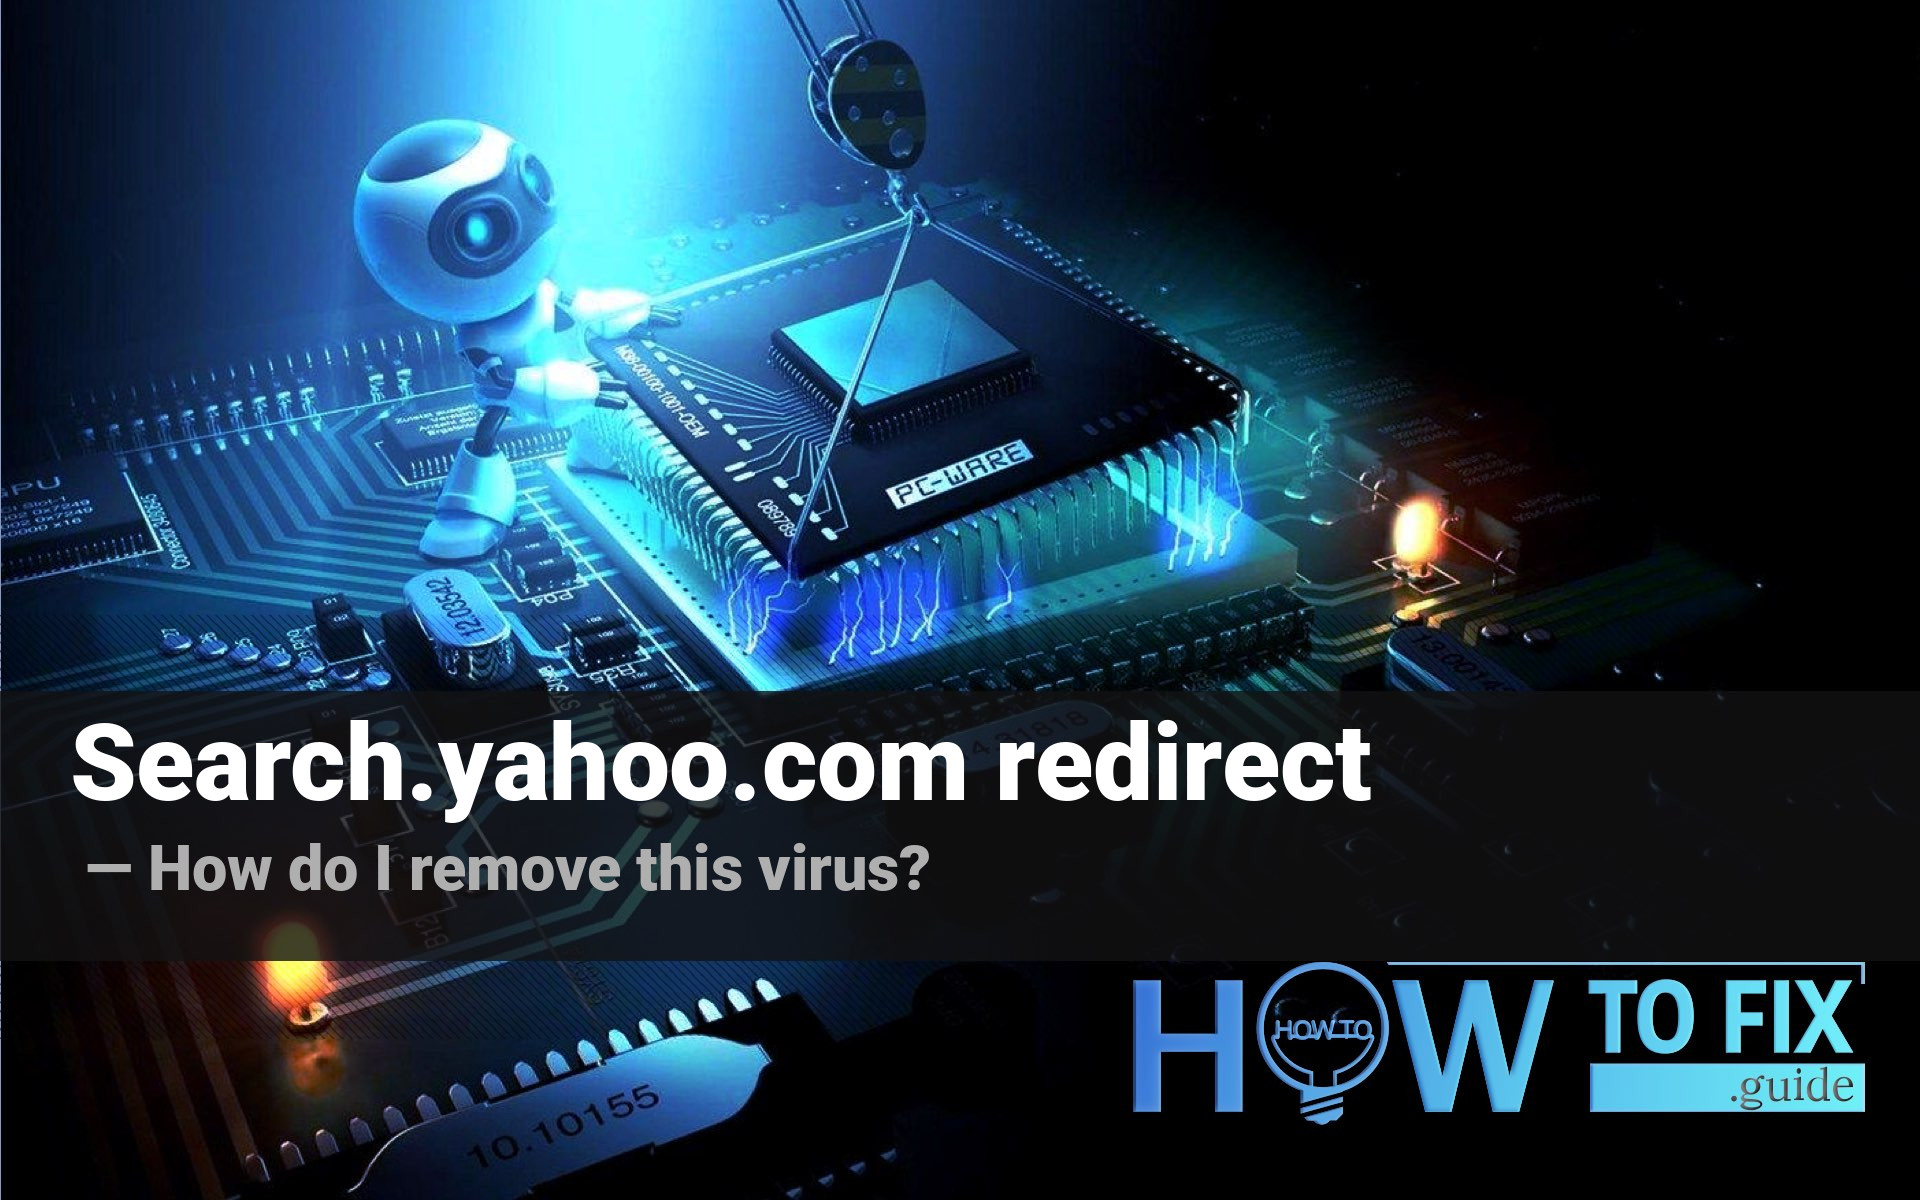 Search.yahoo.com redirect. How to remove this annoying thing?